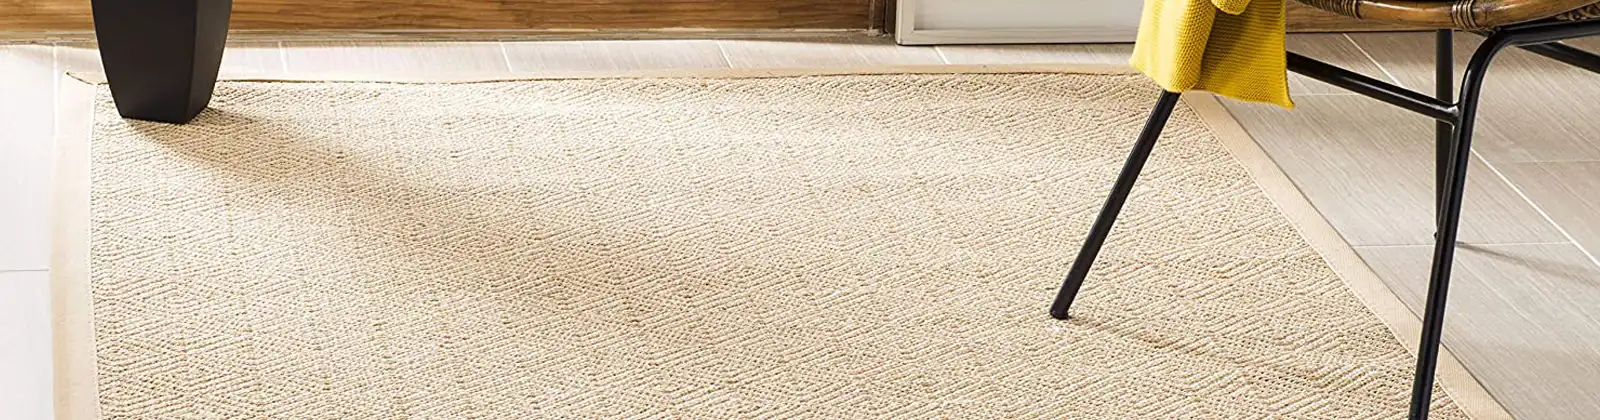 Sisal Rug Cleaning Services Pompano Beach